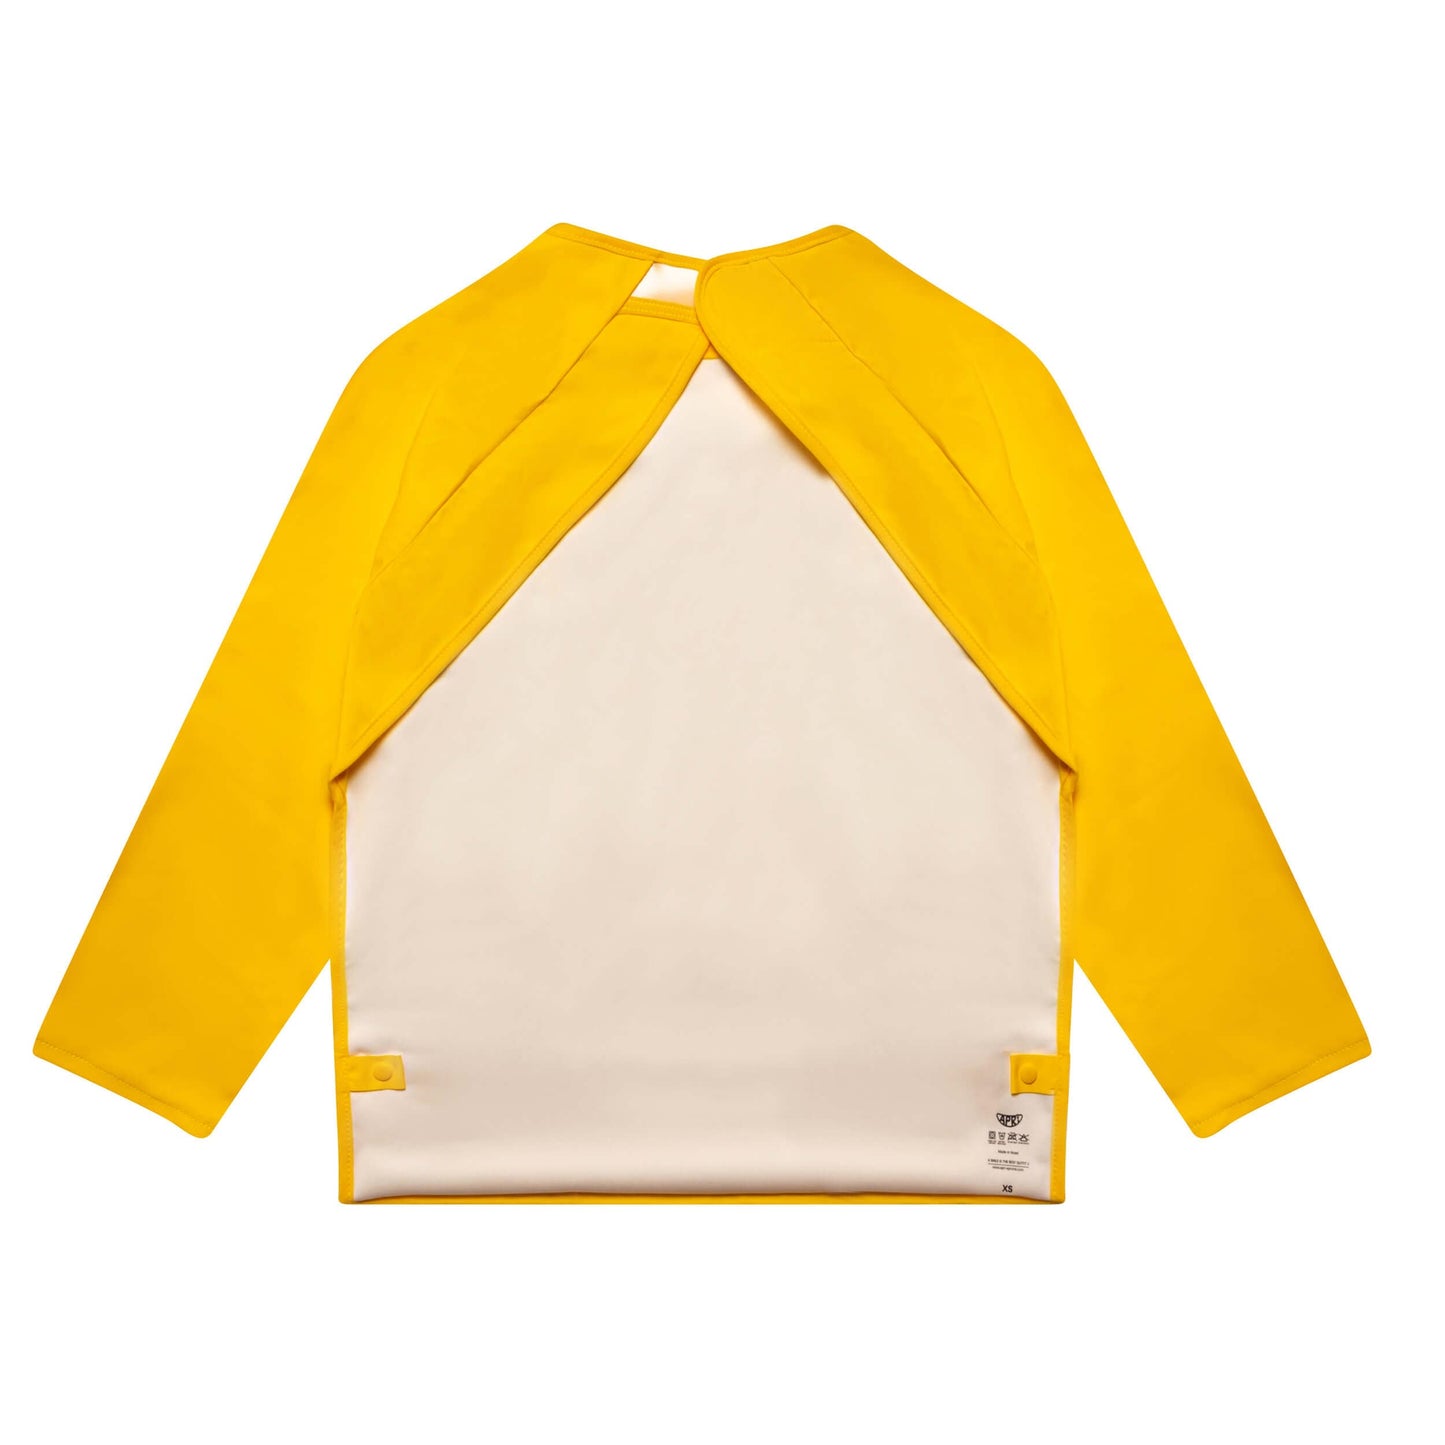 ensory-friendly Apri bib in sunshine yellow, long sleeves, food pocket, and washable silicone fastener for kids, teens, and adults with disabilities.